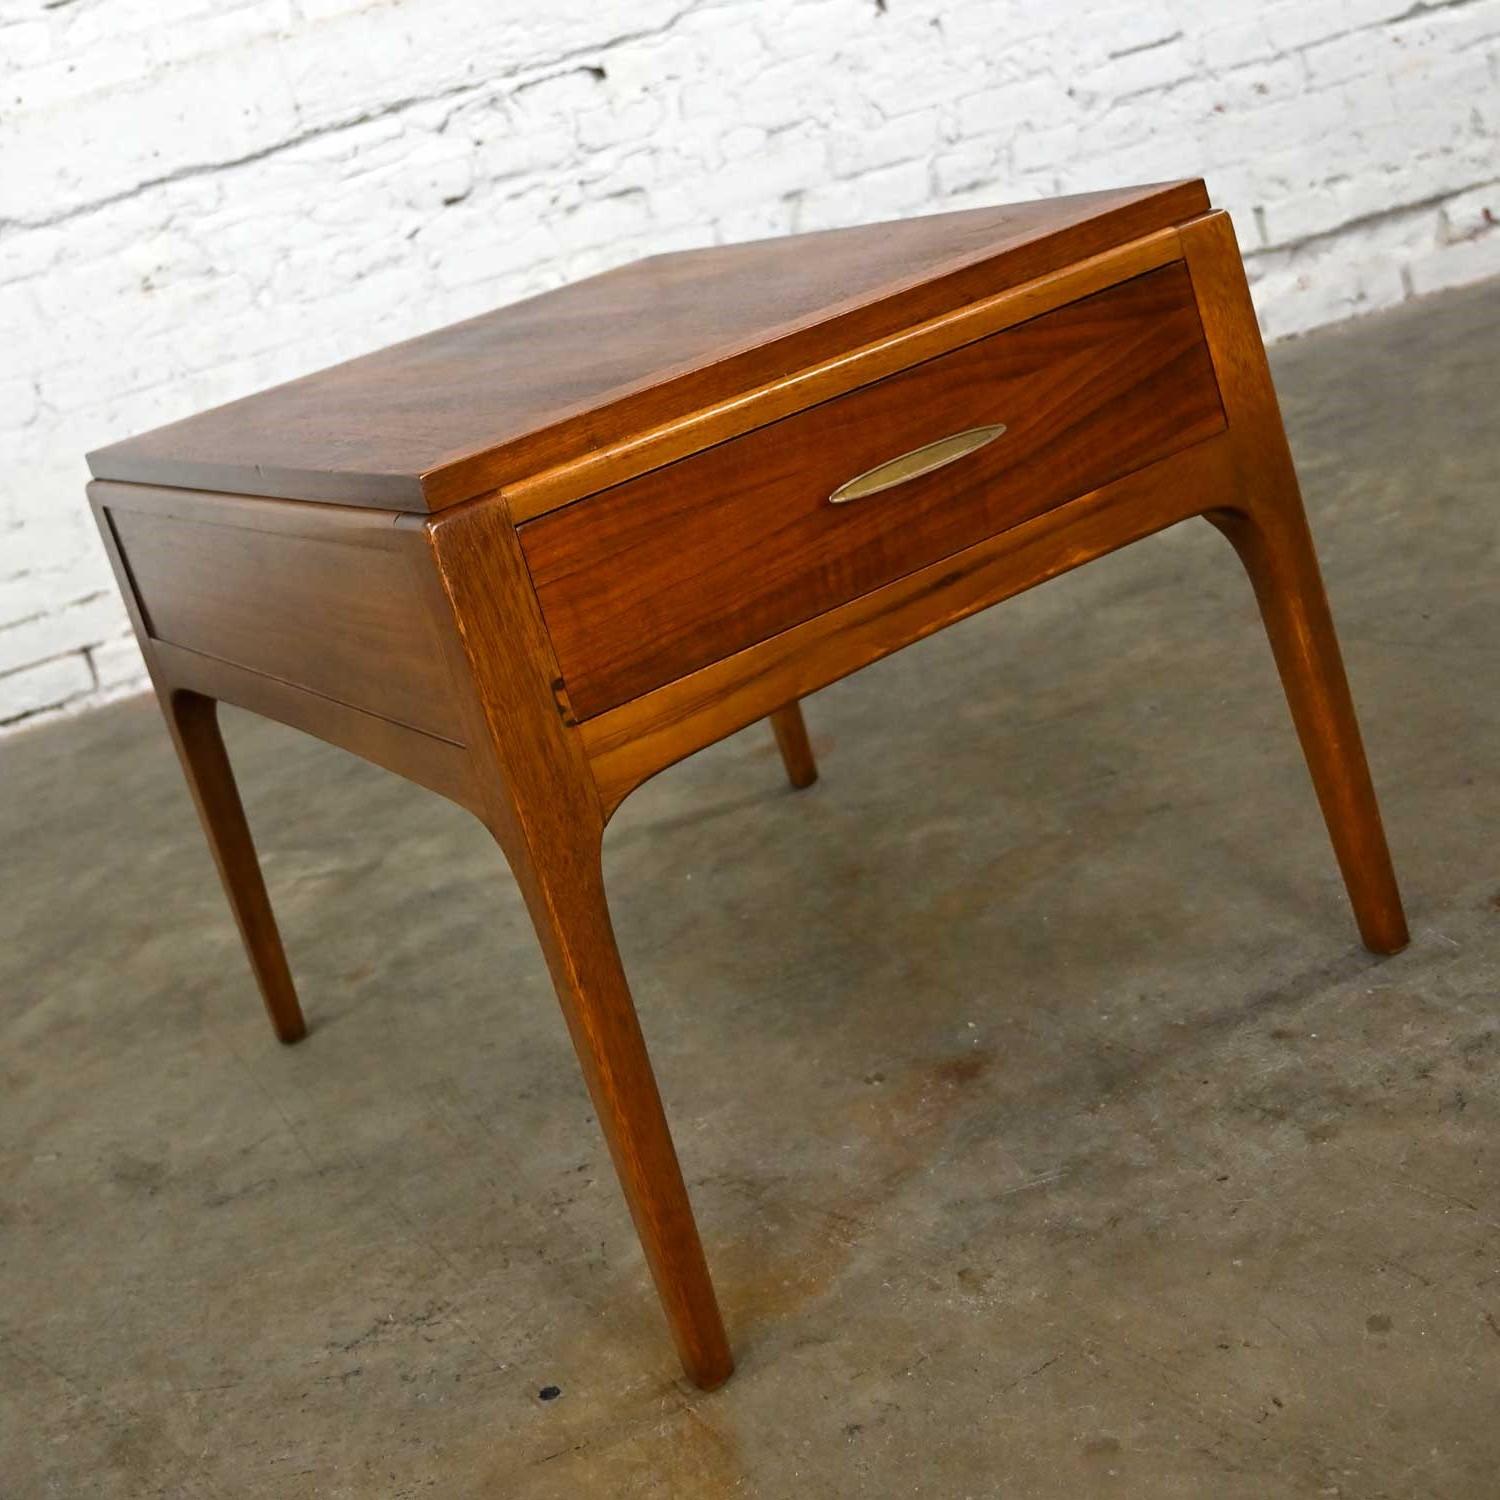 Handsome Lane Rhythm Collection mid-century modern walnut single end table with a drawer and brass pull. Lovely condition, keeping in mind that this is vintage and not new so will have signs of use and wear. The top has been refinished and a new